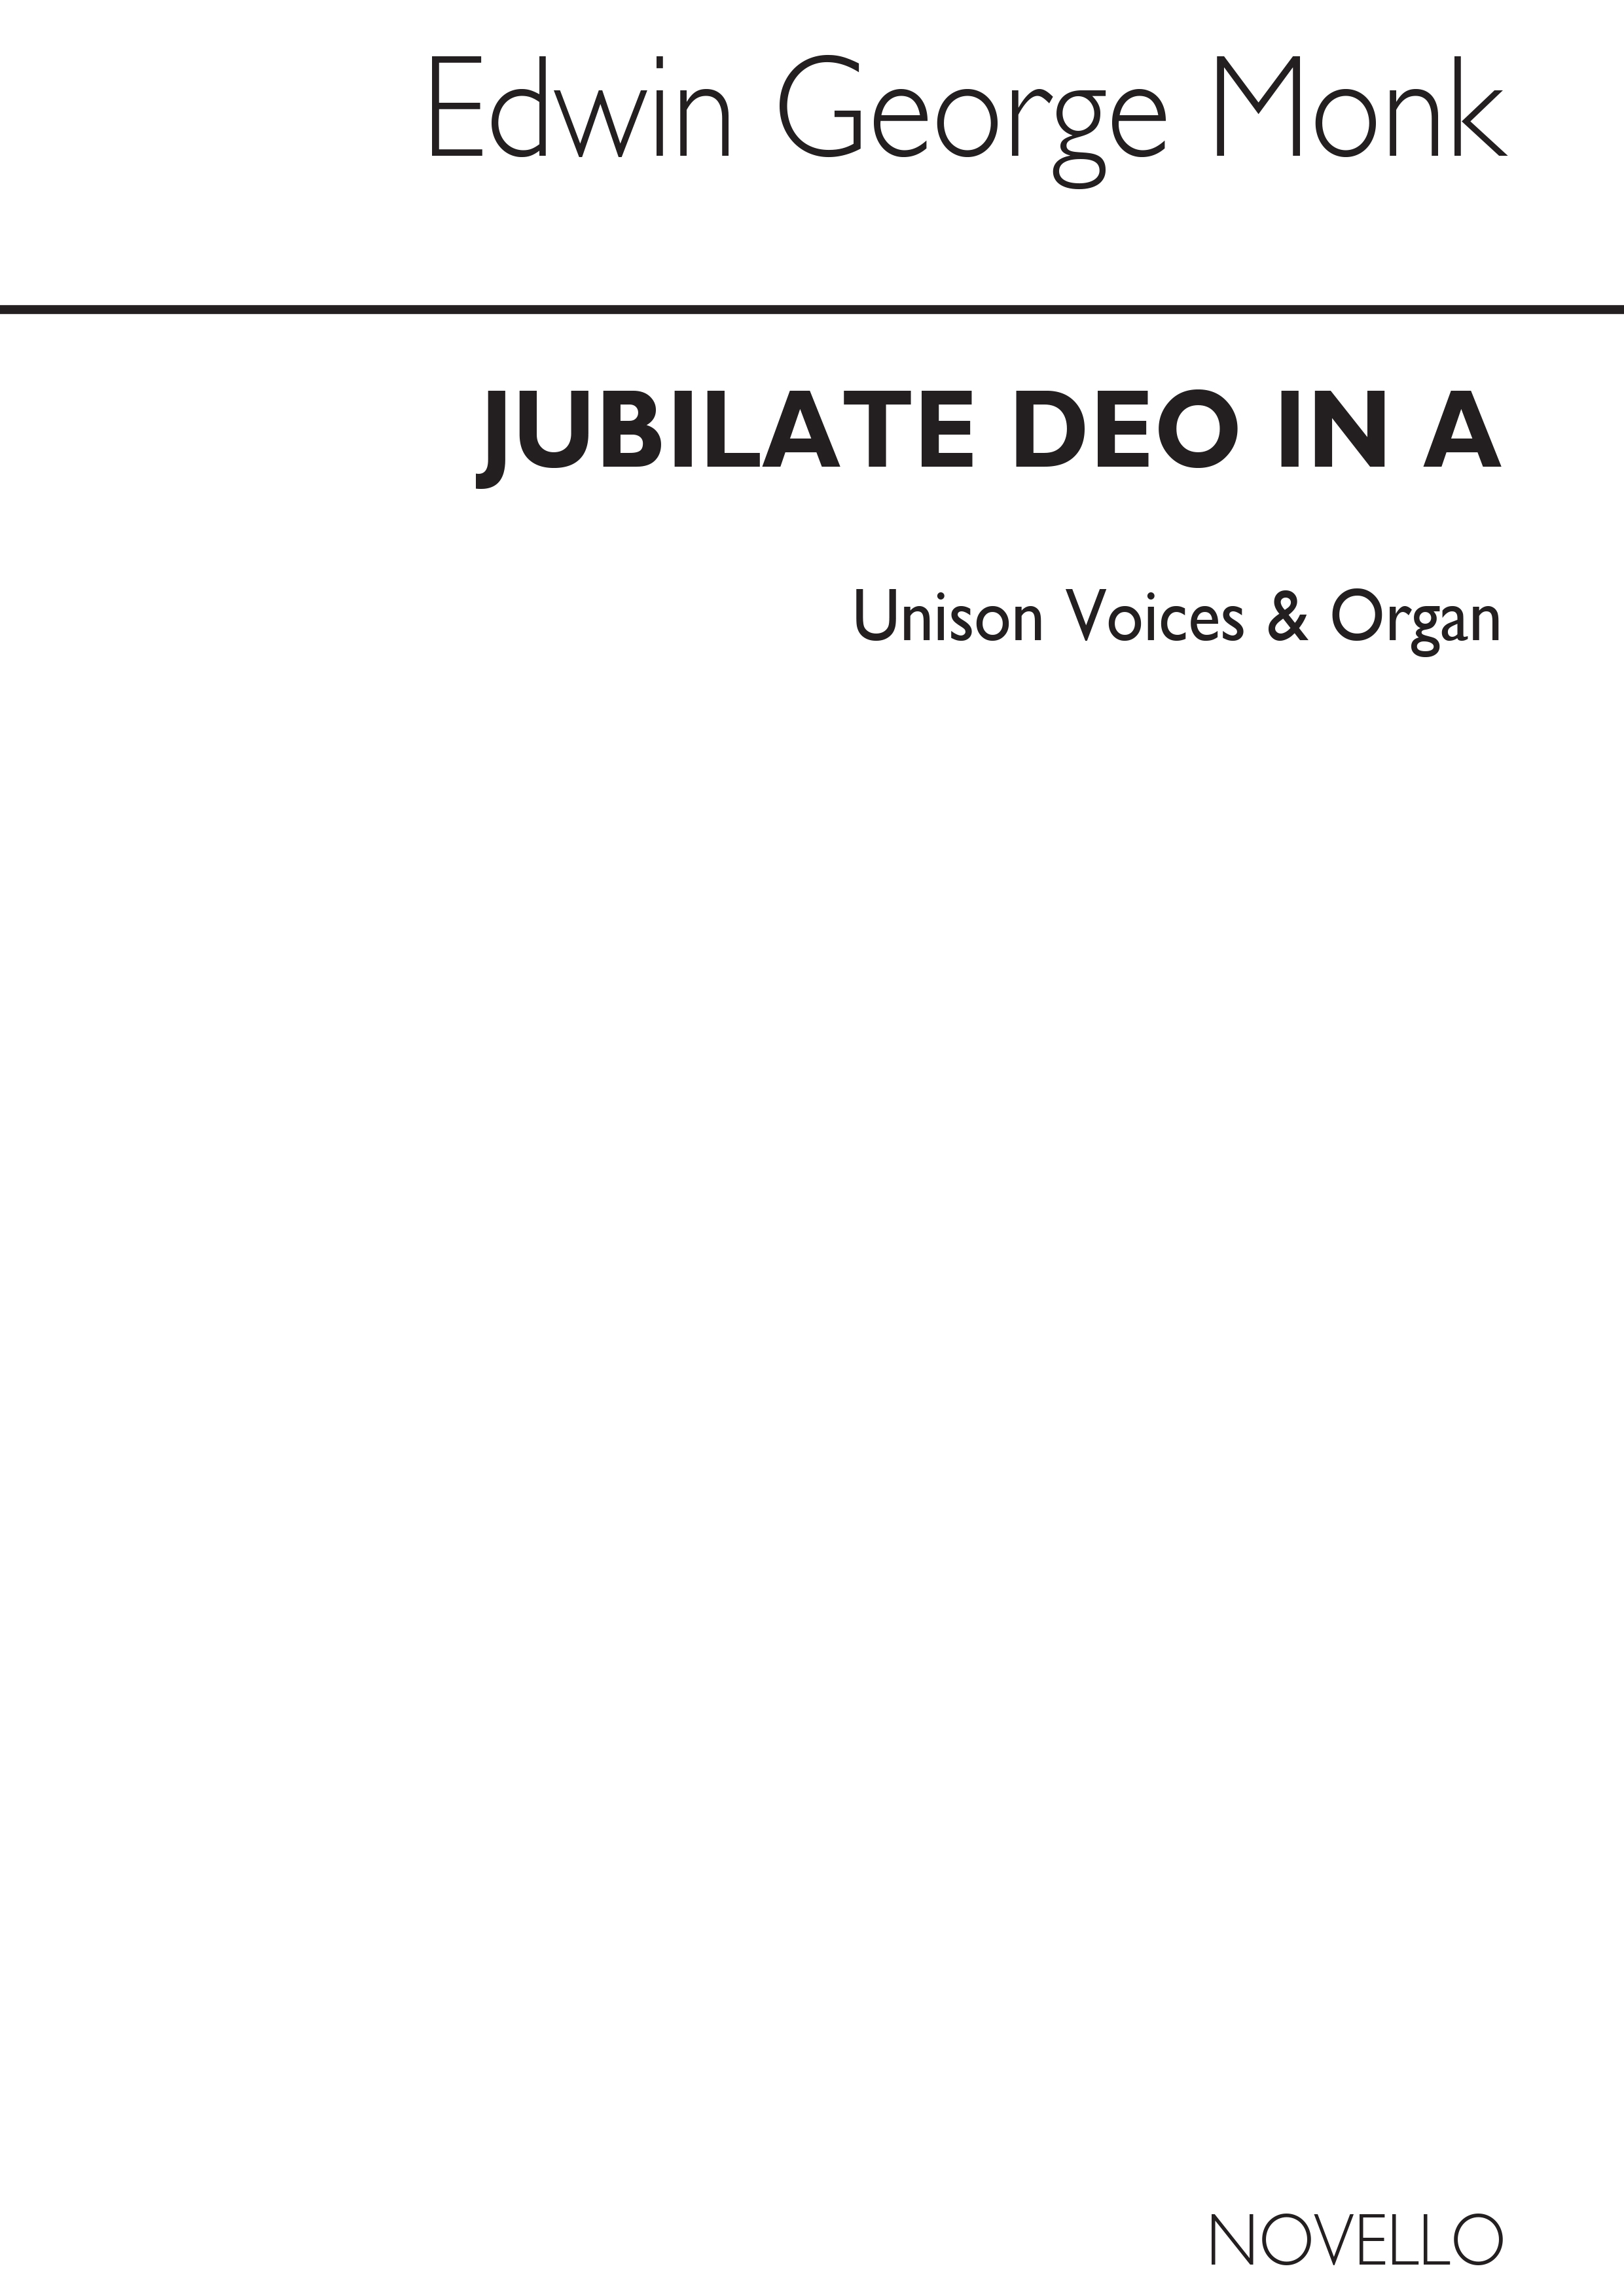 Edwin George Monk: Jubilate Deo In A Organ: Unison Voices: Vocal Score